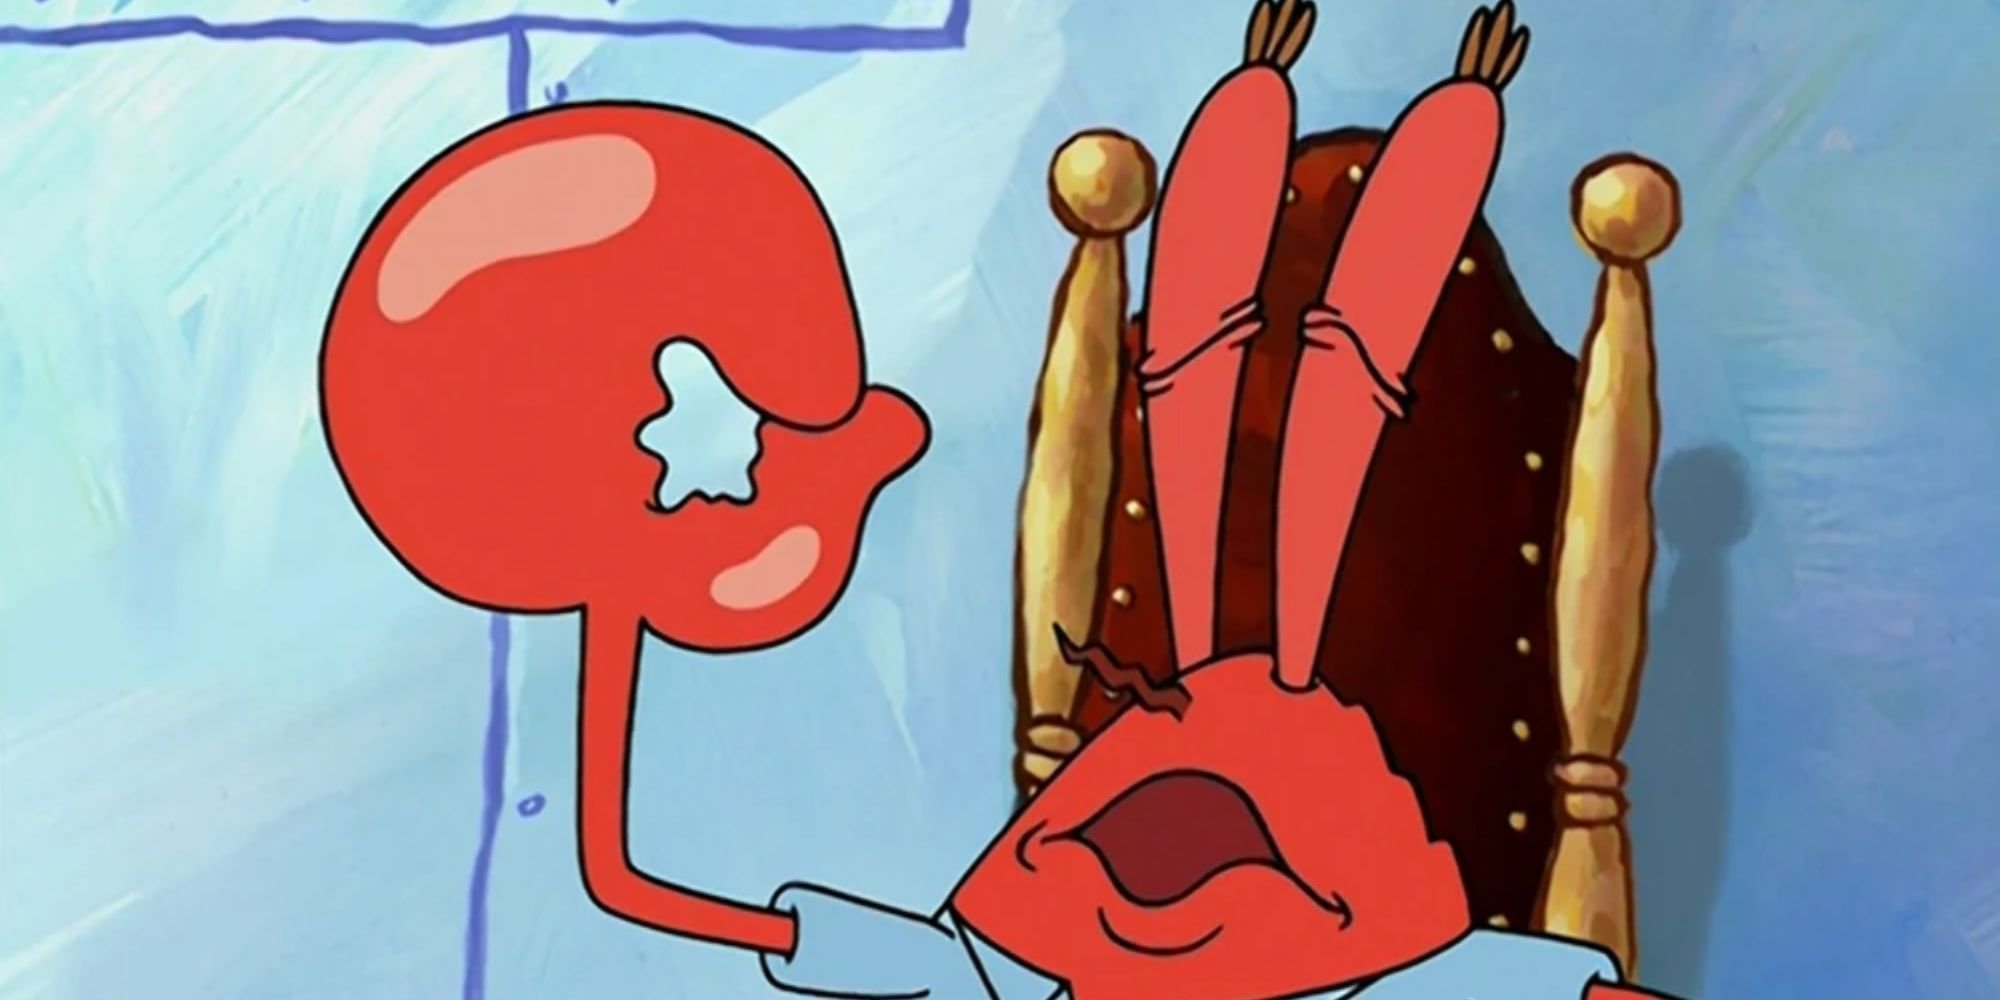 Mr Krabs playing the world's smallest violin.